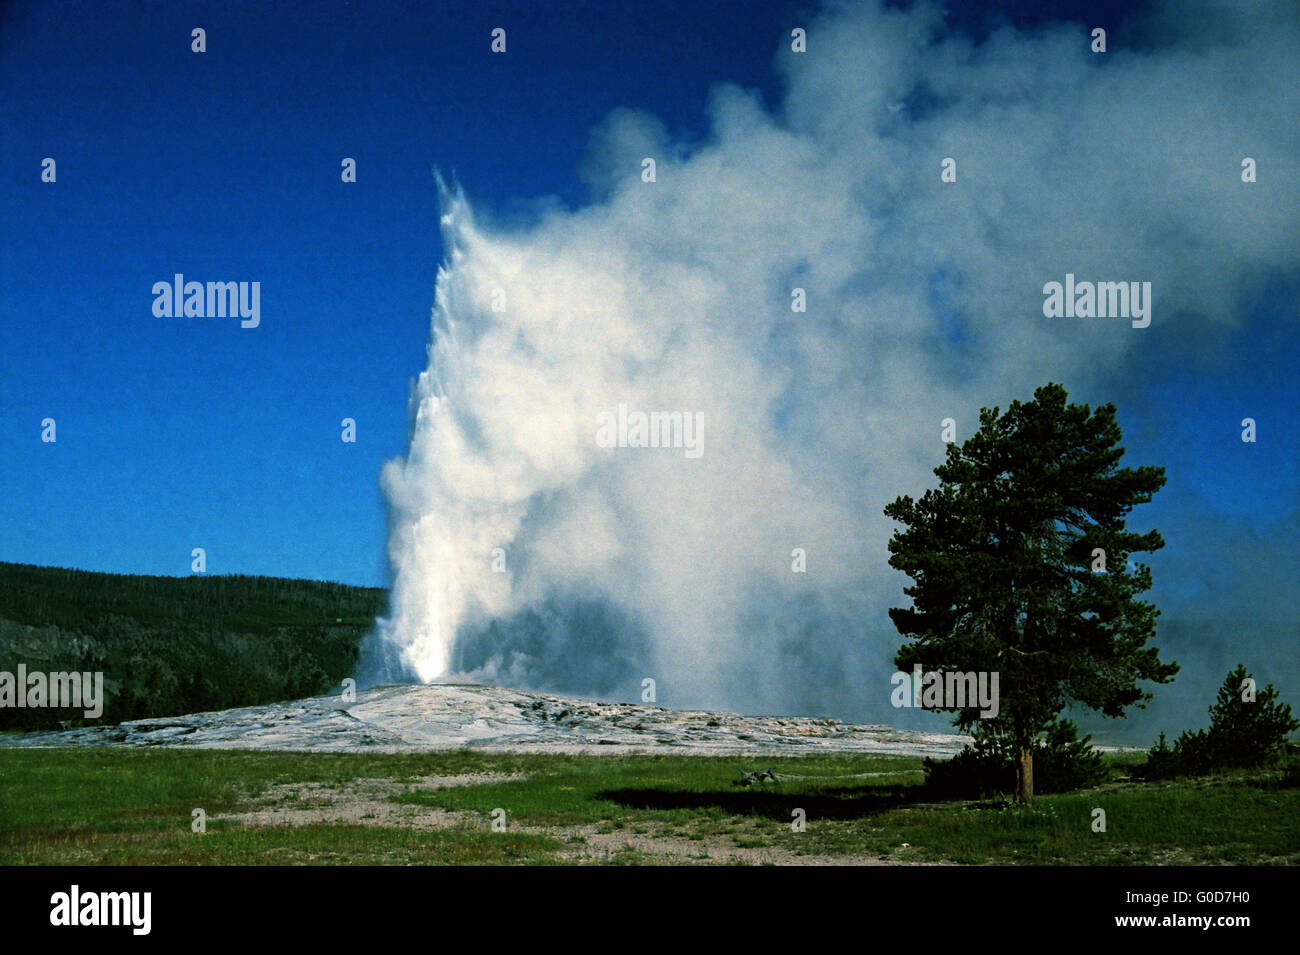 An eruption of the geyser Old Faithful at Yellowstone National Park. Stock Photo